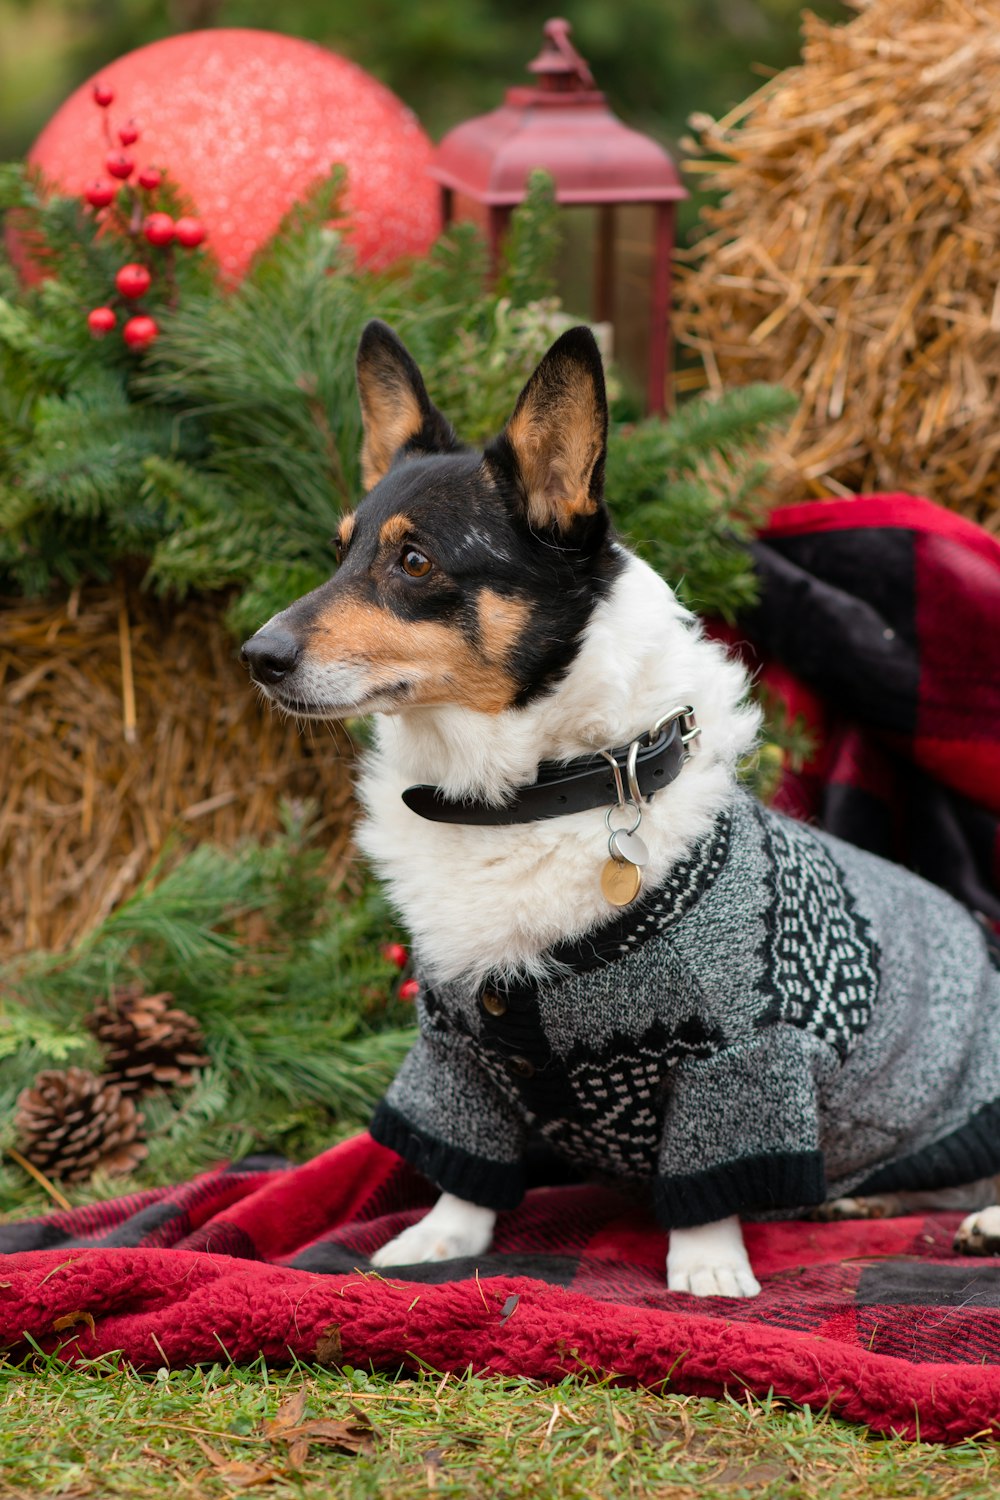 a dog wearing a sweater sitting on a blanket